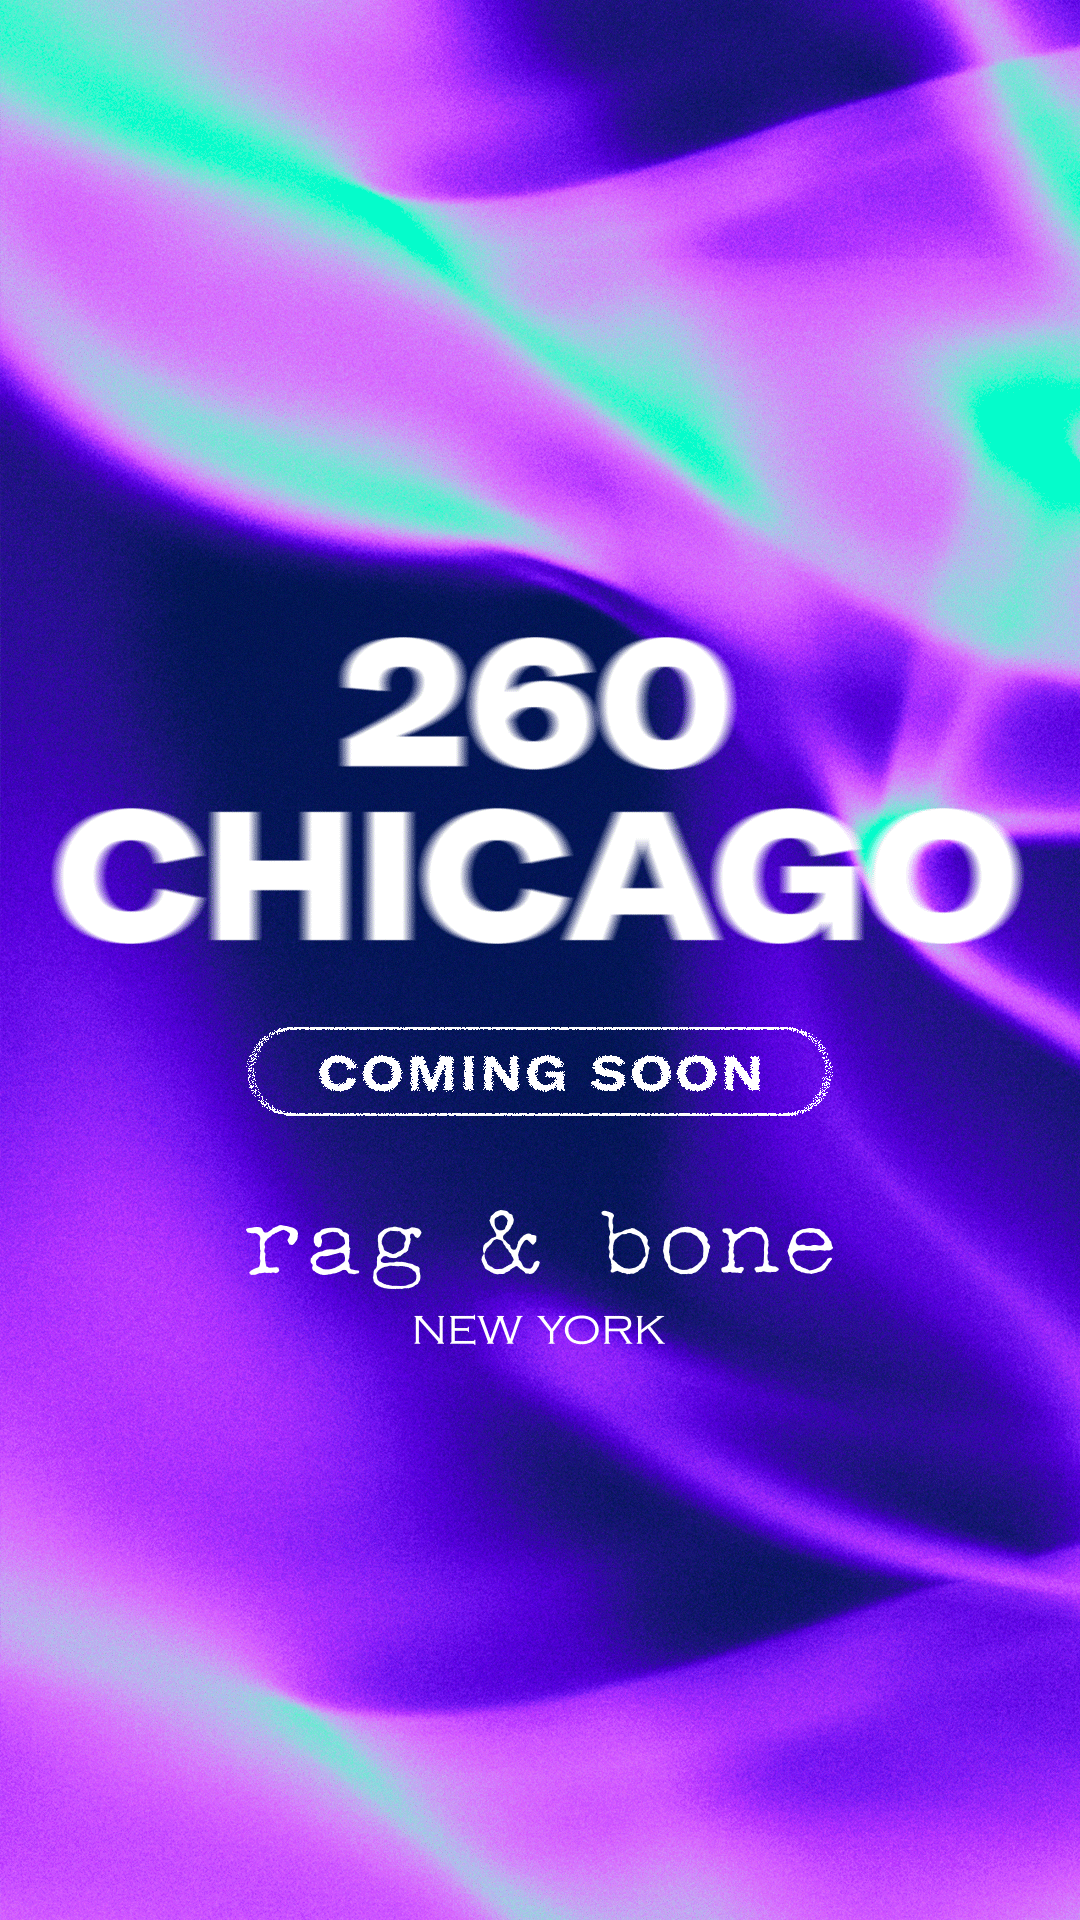 Chicago → 260 Sample Sale is head your way!